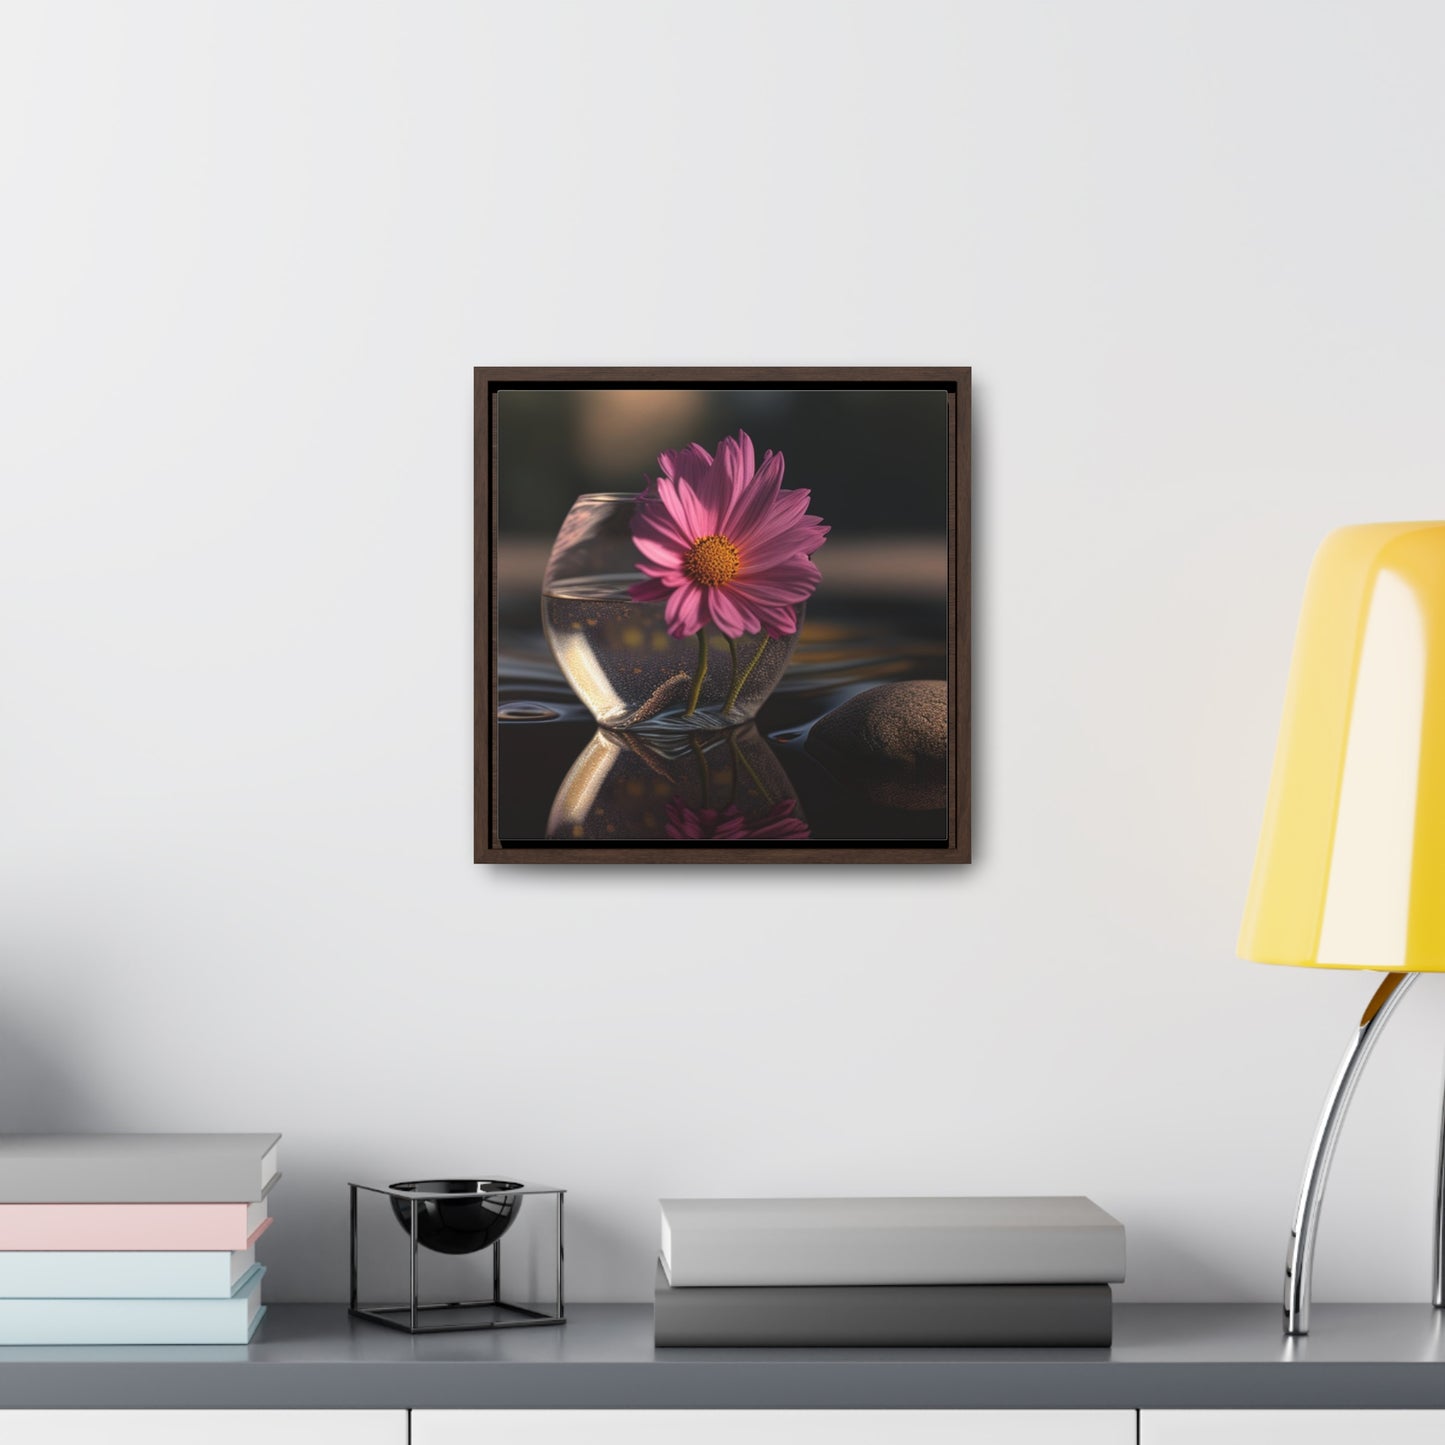 Gallery Canvas Wraps, Square Frame Pink Daisy 4